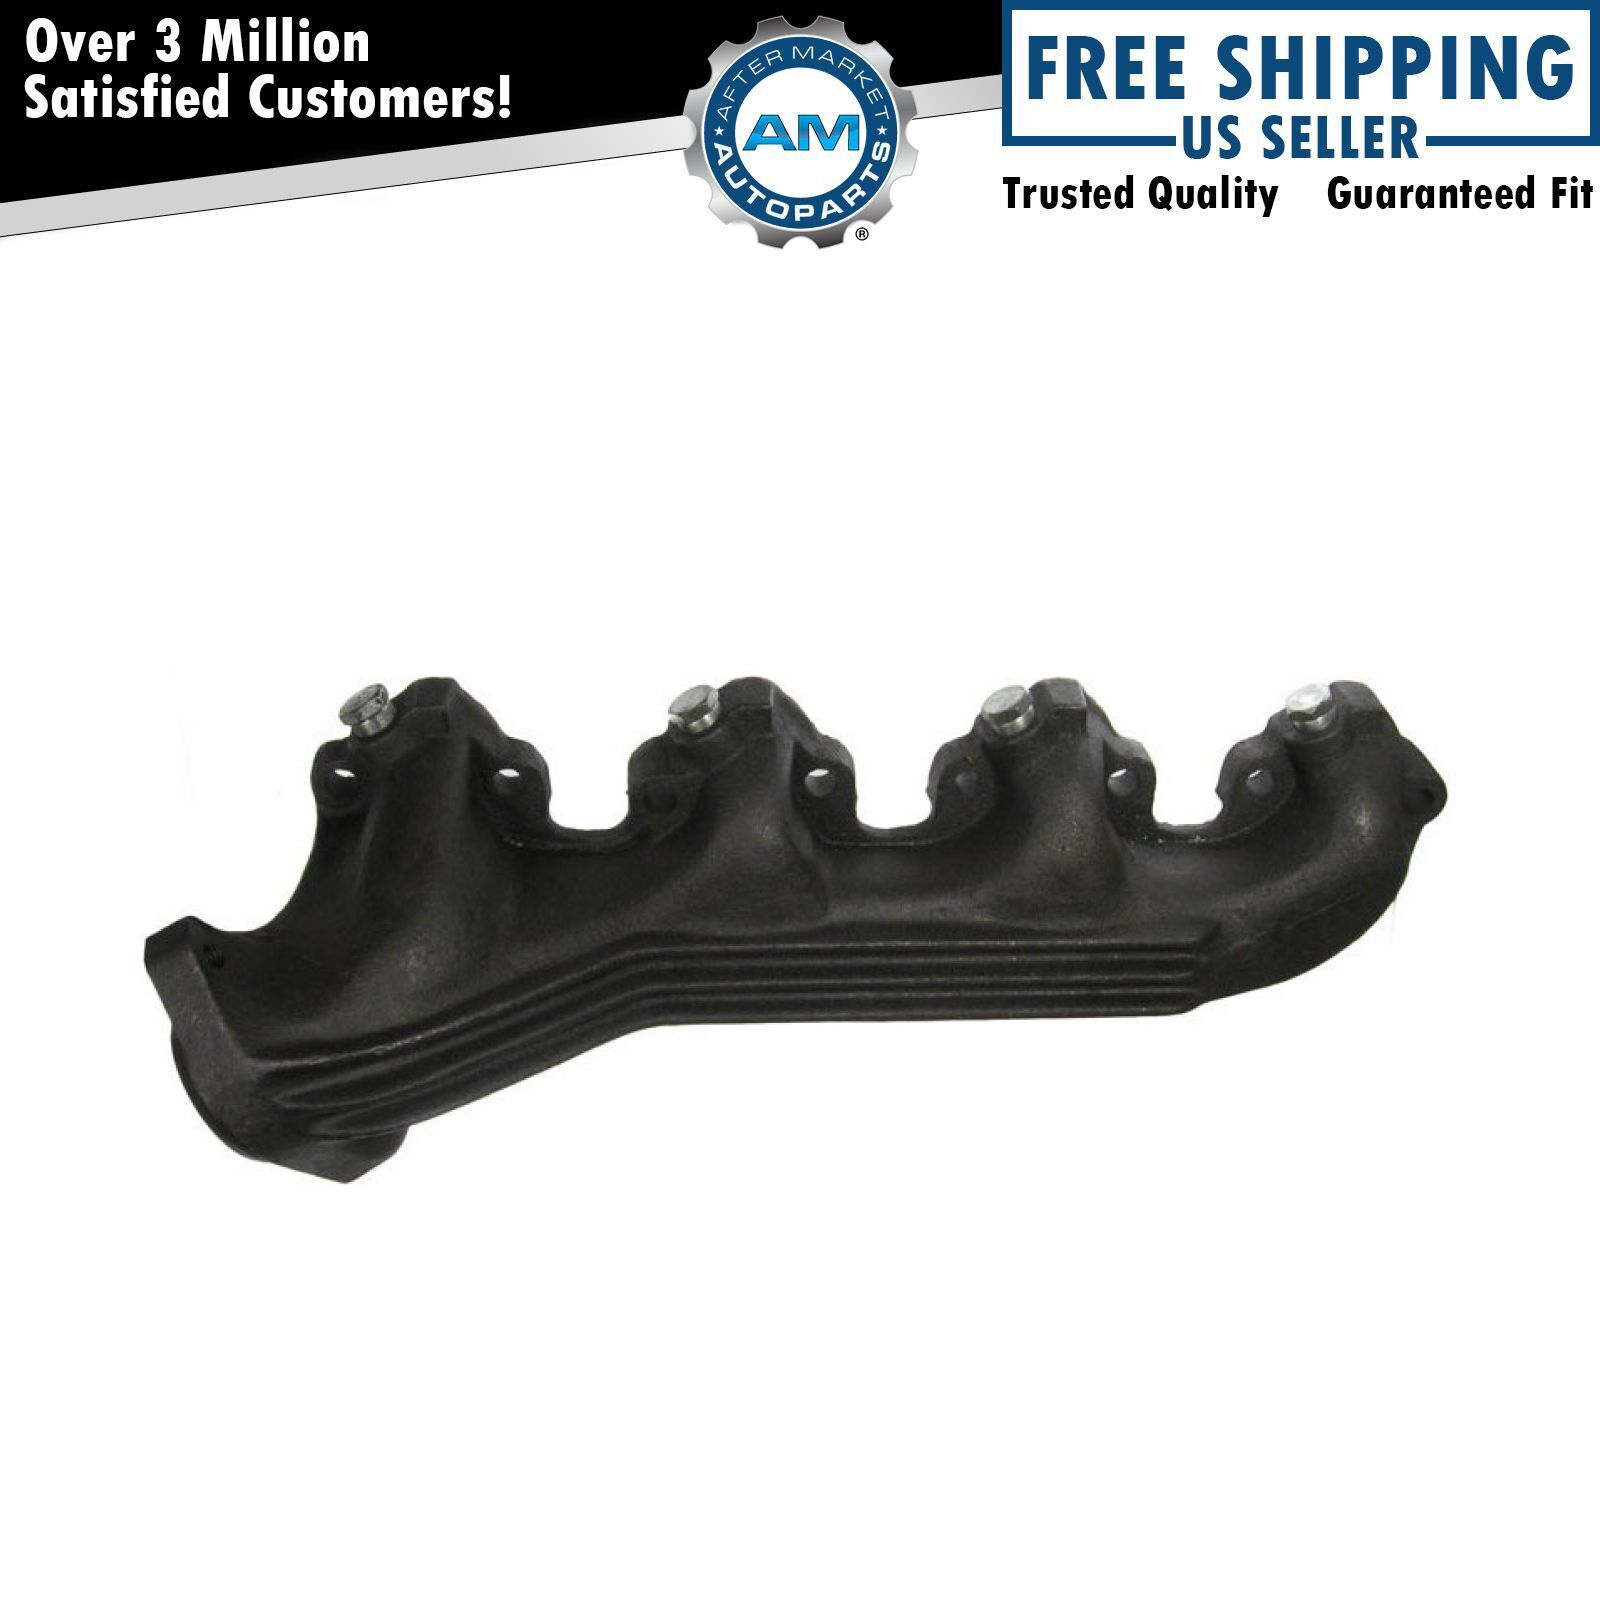 Exhaust Manifold Passenger Side Right RH for 75-87 Ford E-Series F-Series Truck